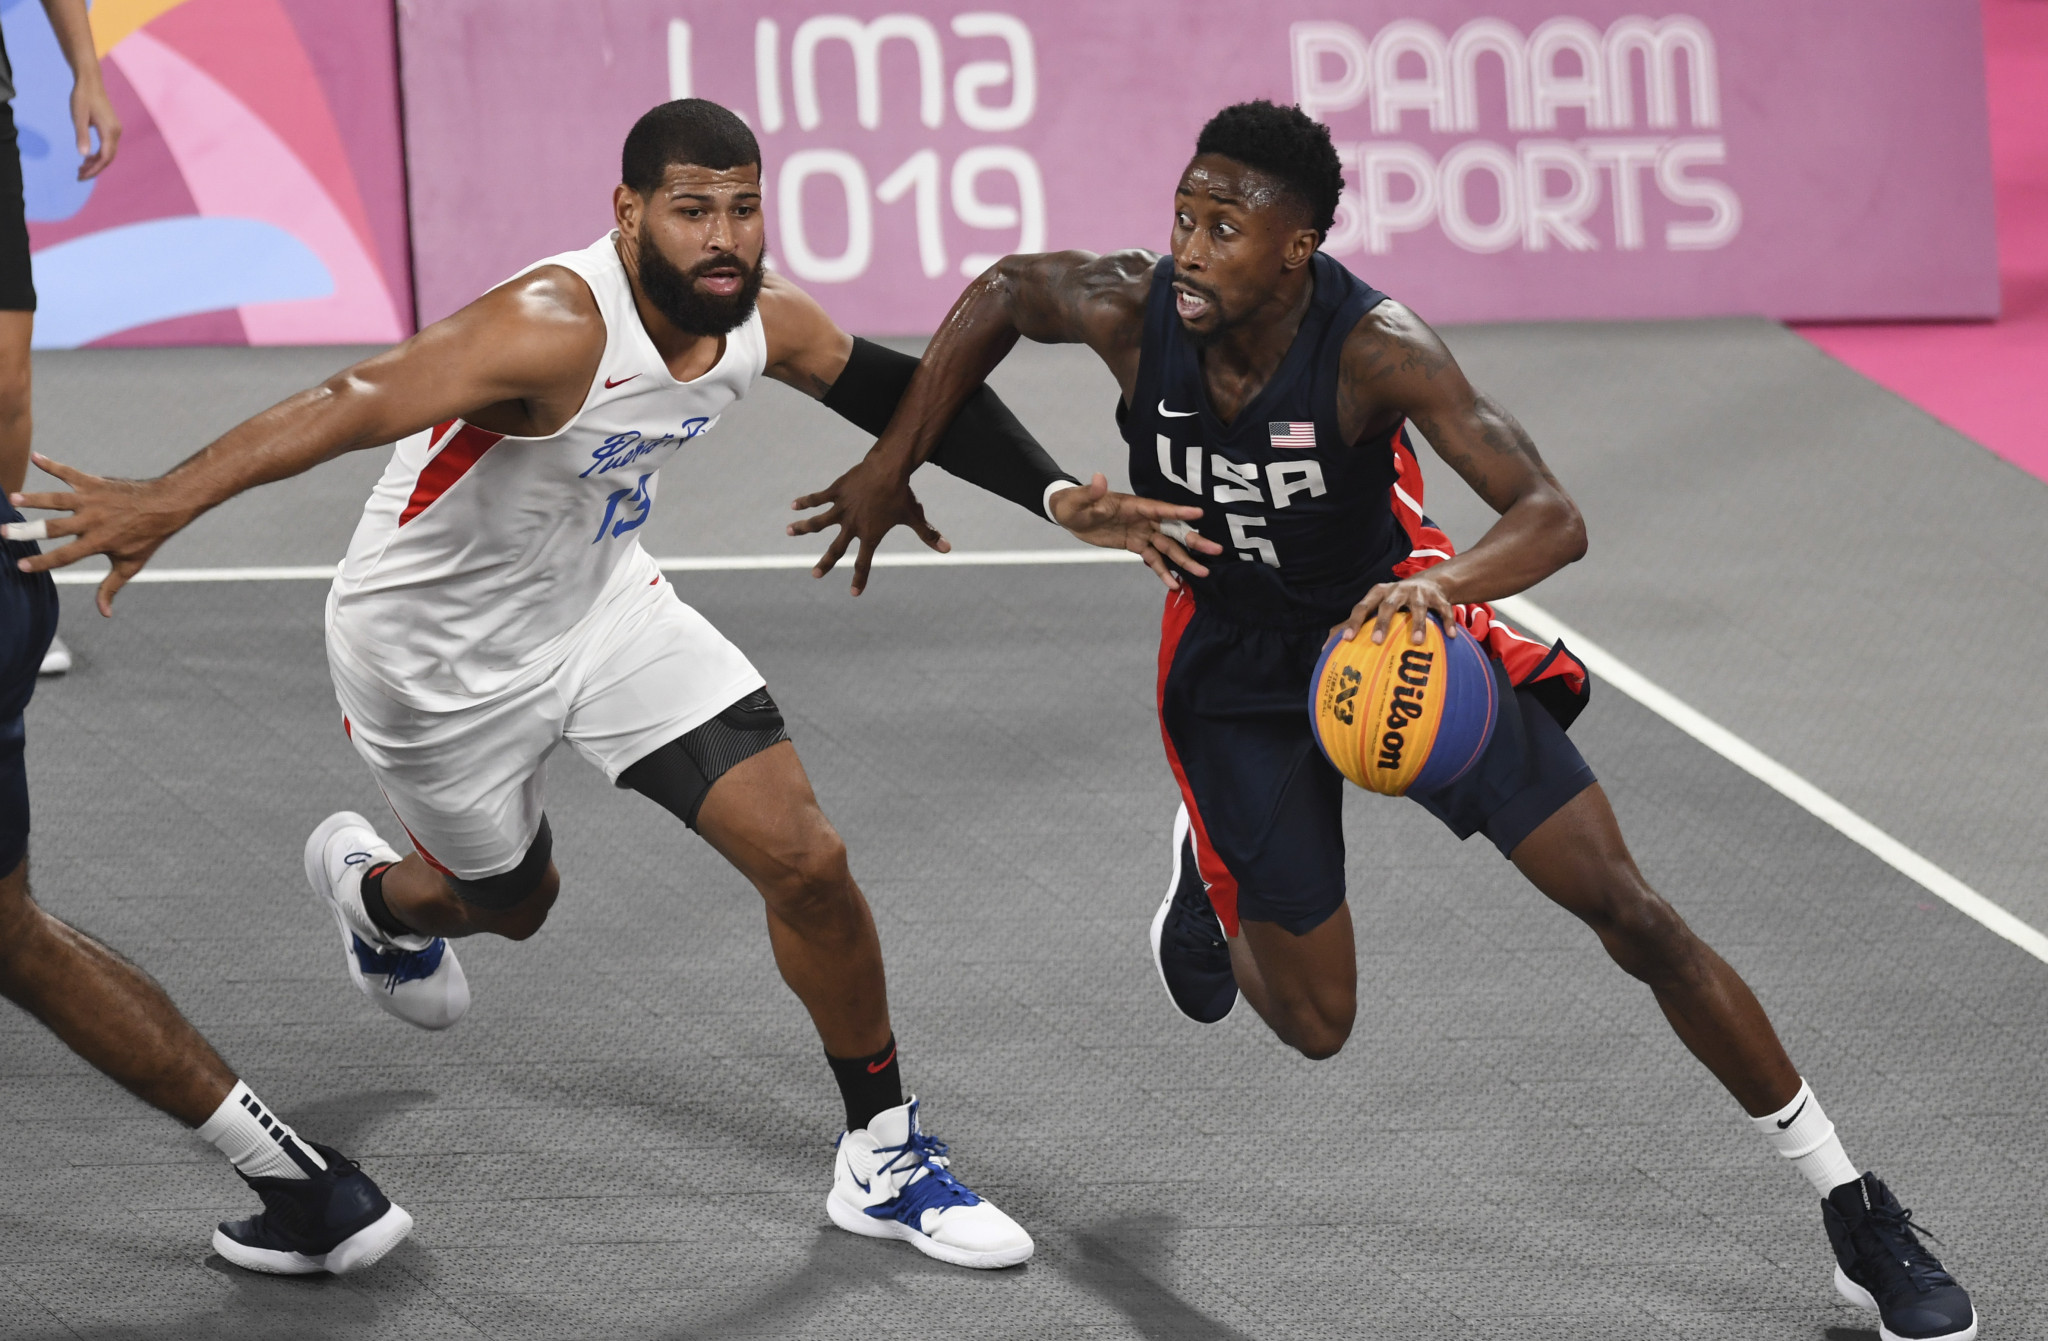 The US enjoyed more success on the 3x3 basketball court, with the men's side defeating Puerto Rico in the final ©Lima 2019